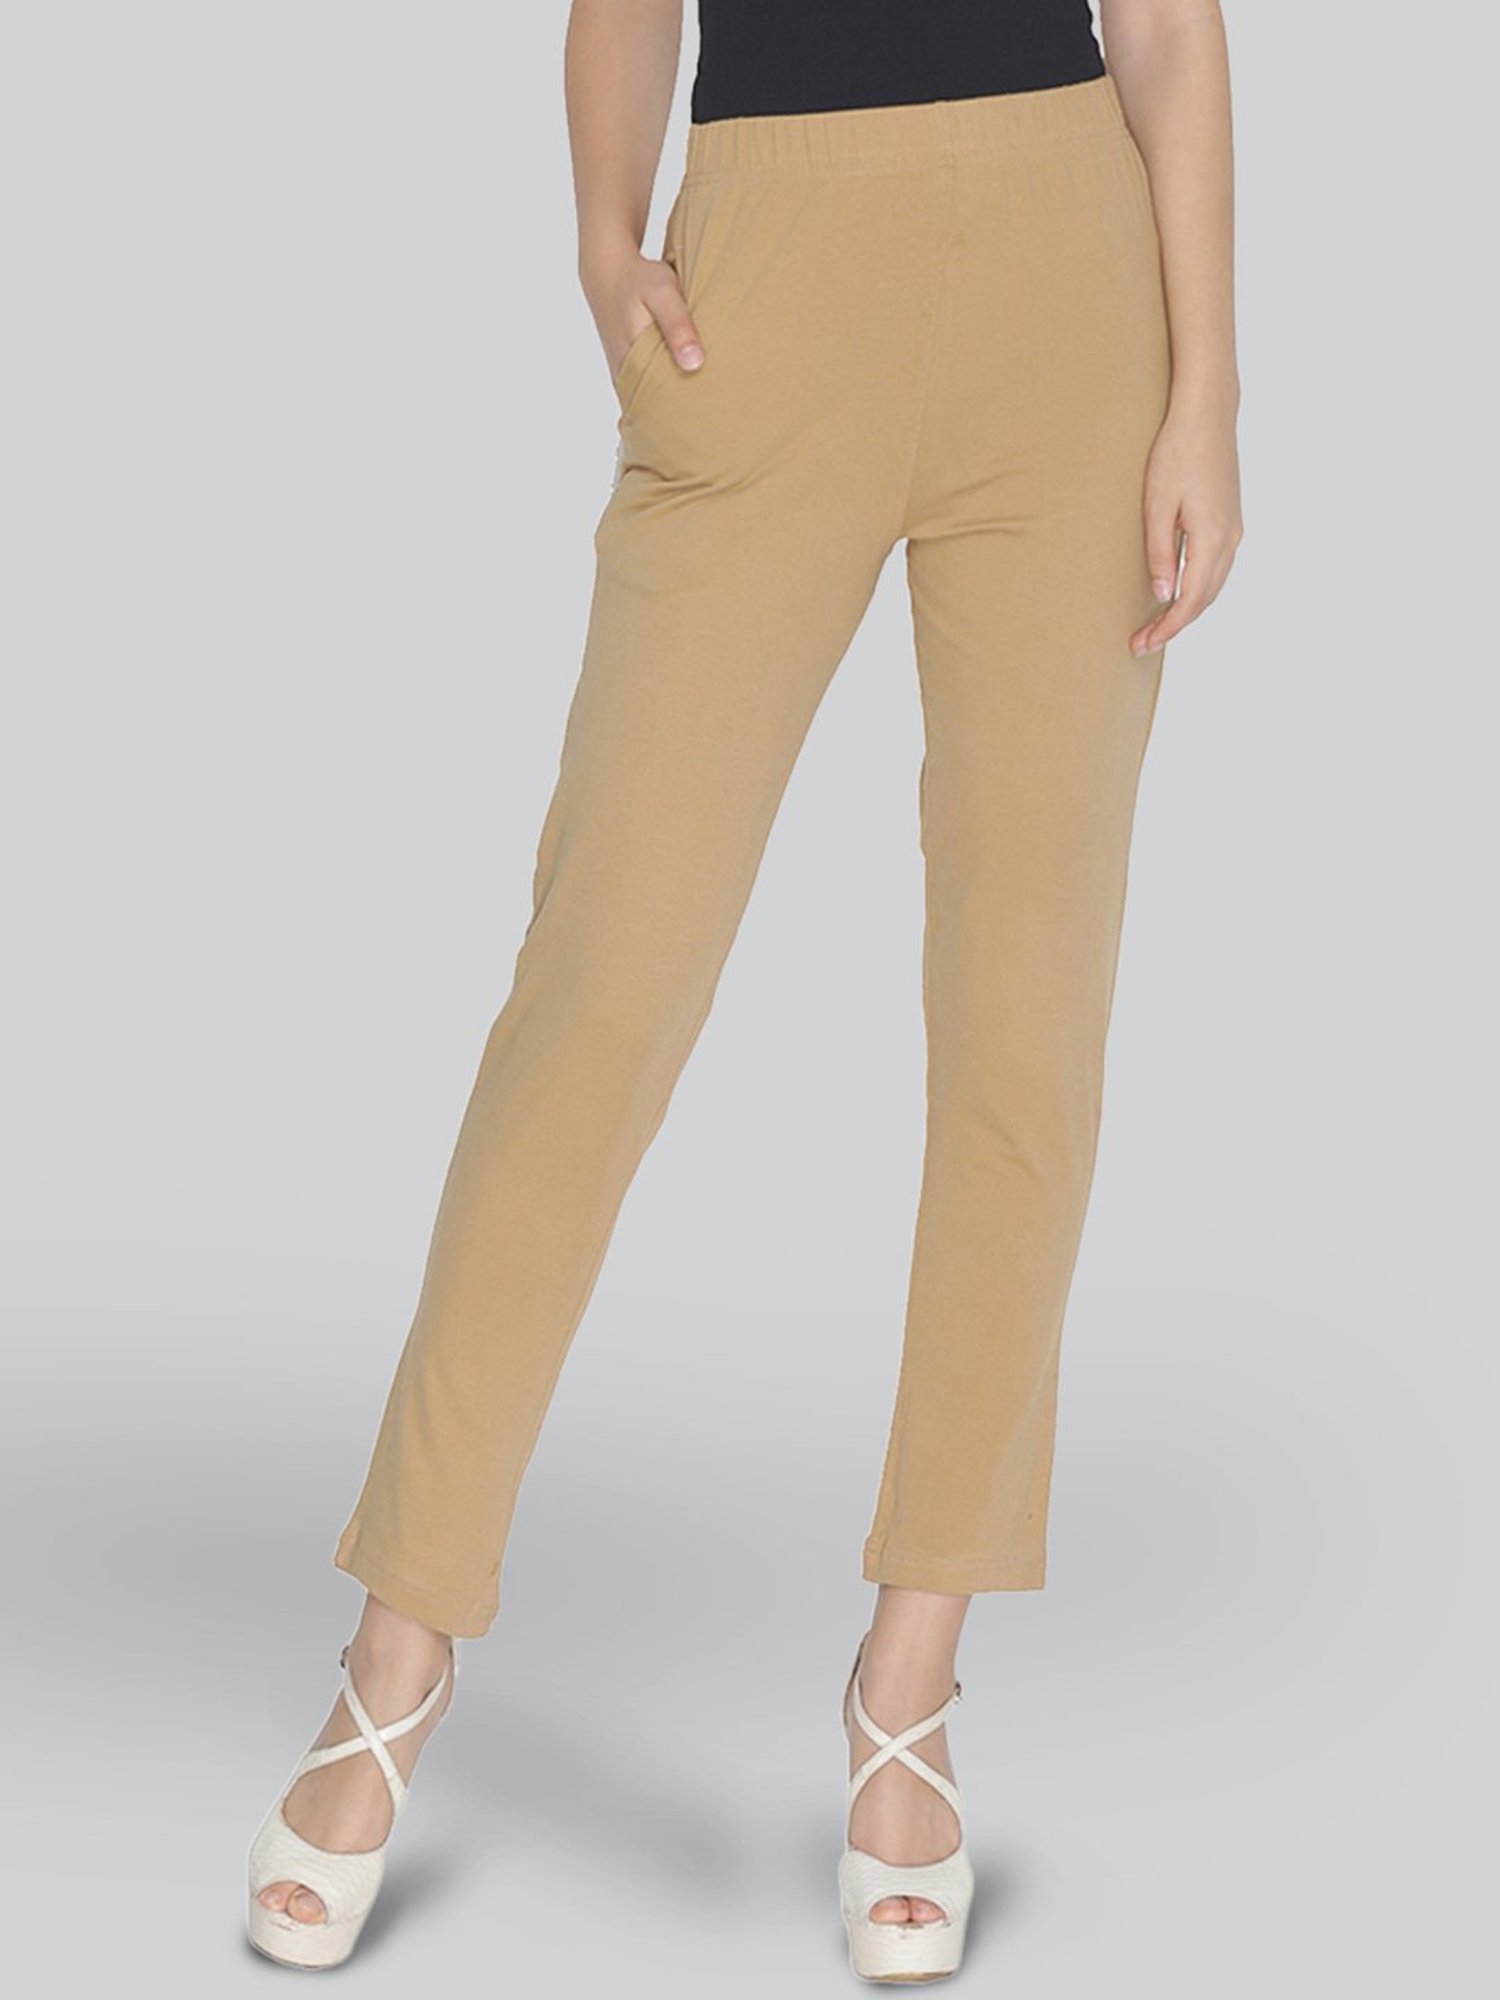 Buy Navy Track Pants for Women by LYRA Online | Ajio.com